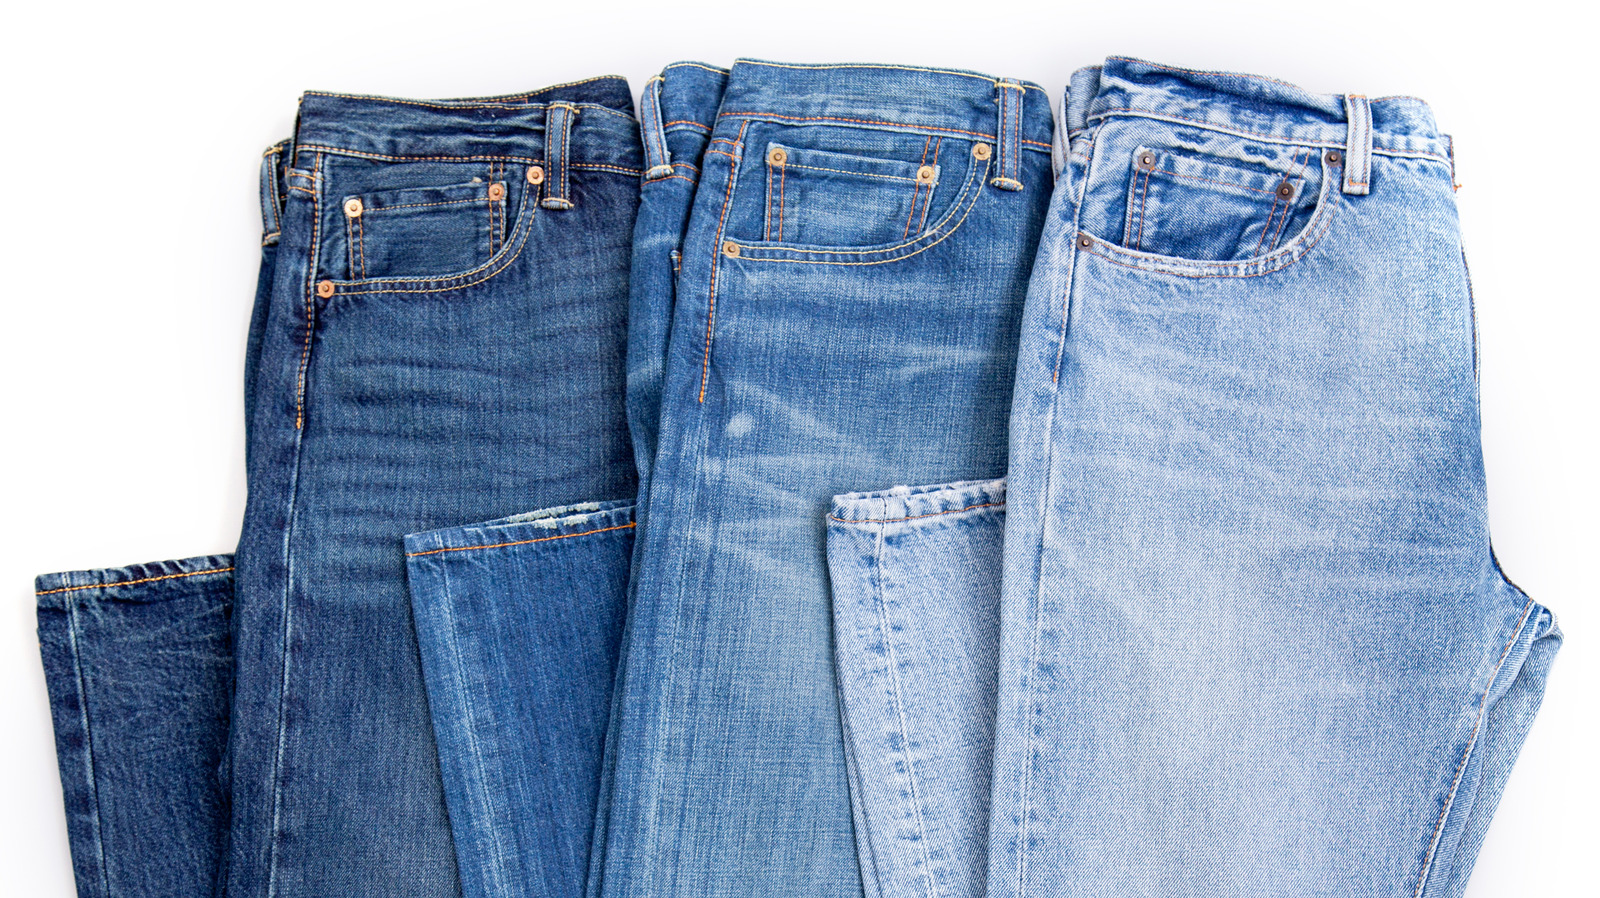 Beginner's Guide to Buying Raw Denim Jeans